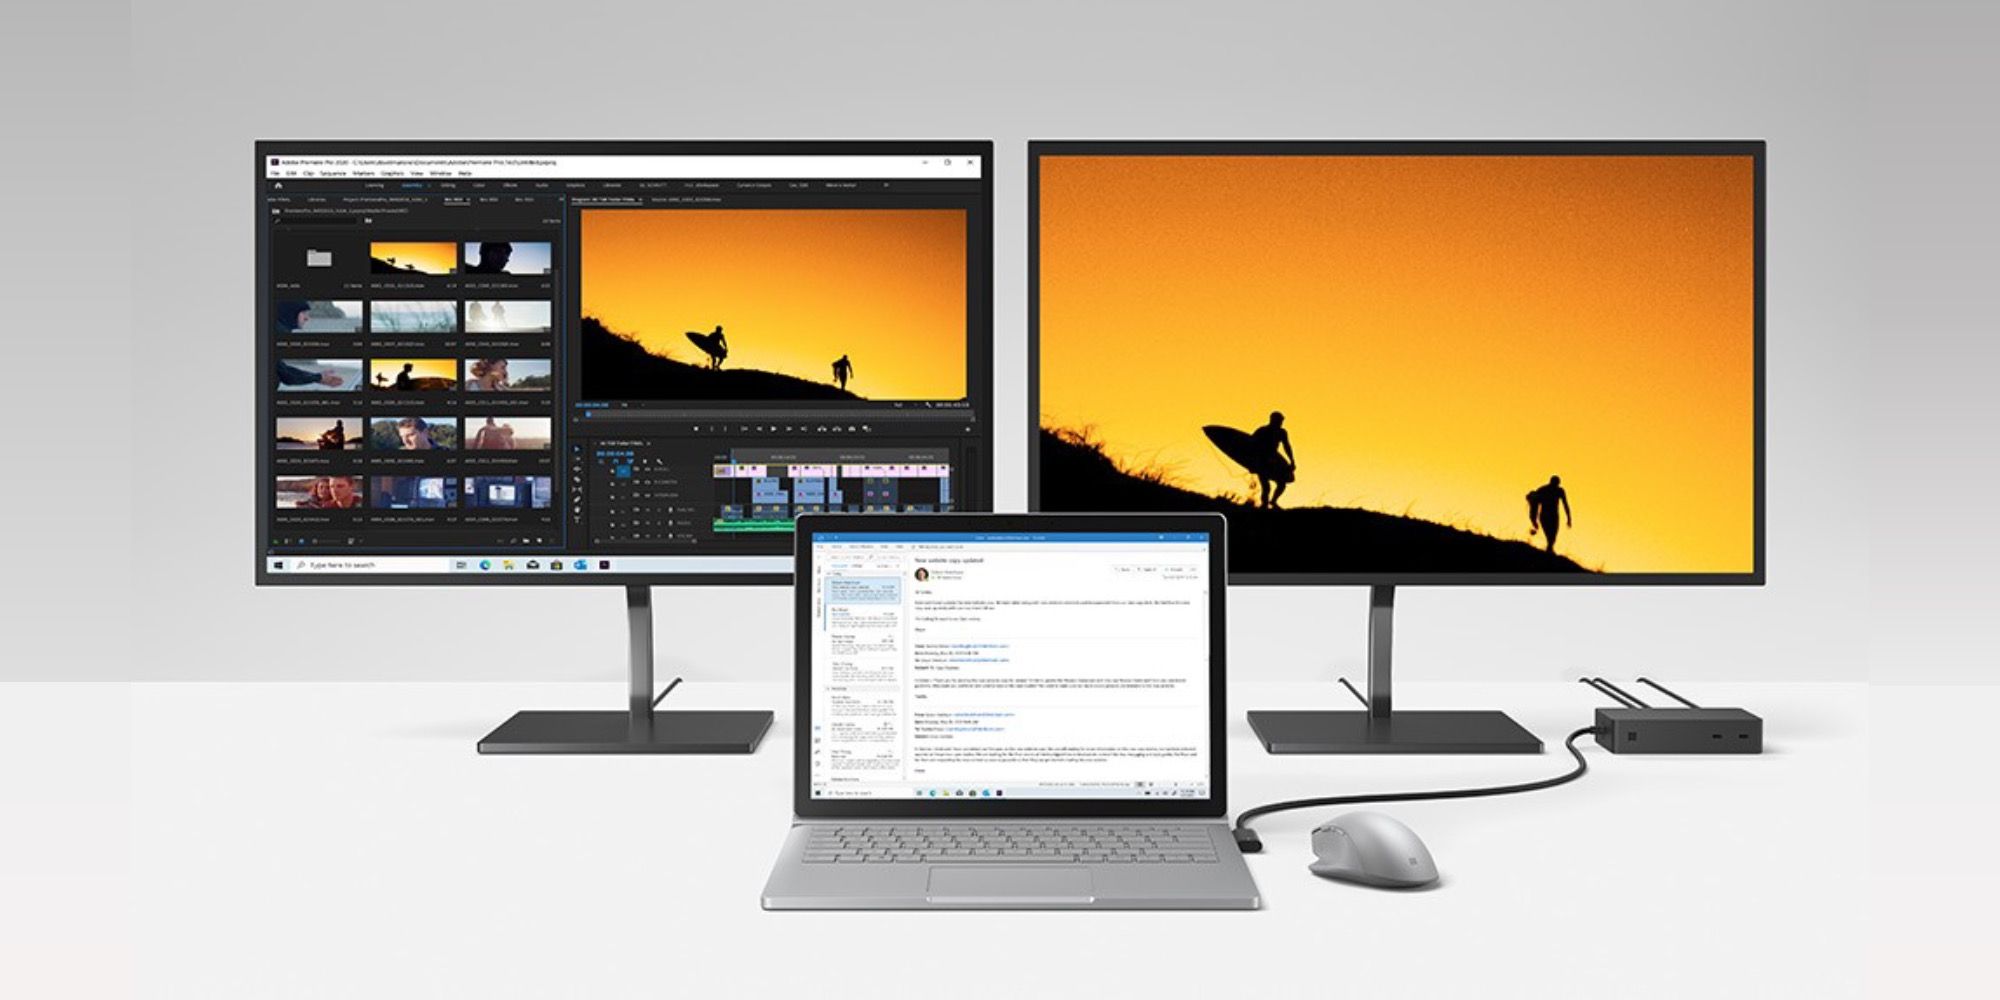 How To Set Up A Windows 10 Laptop To Work With Two Monitors